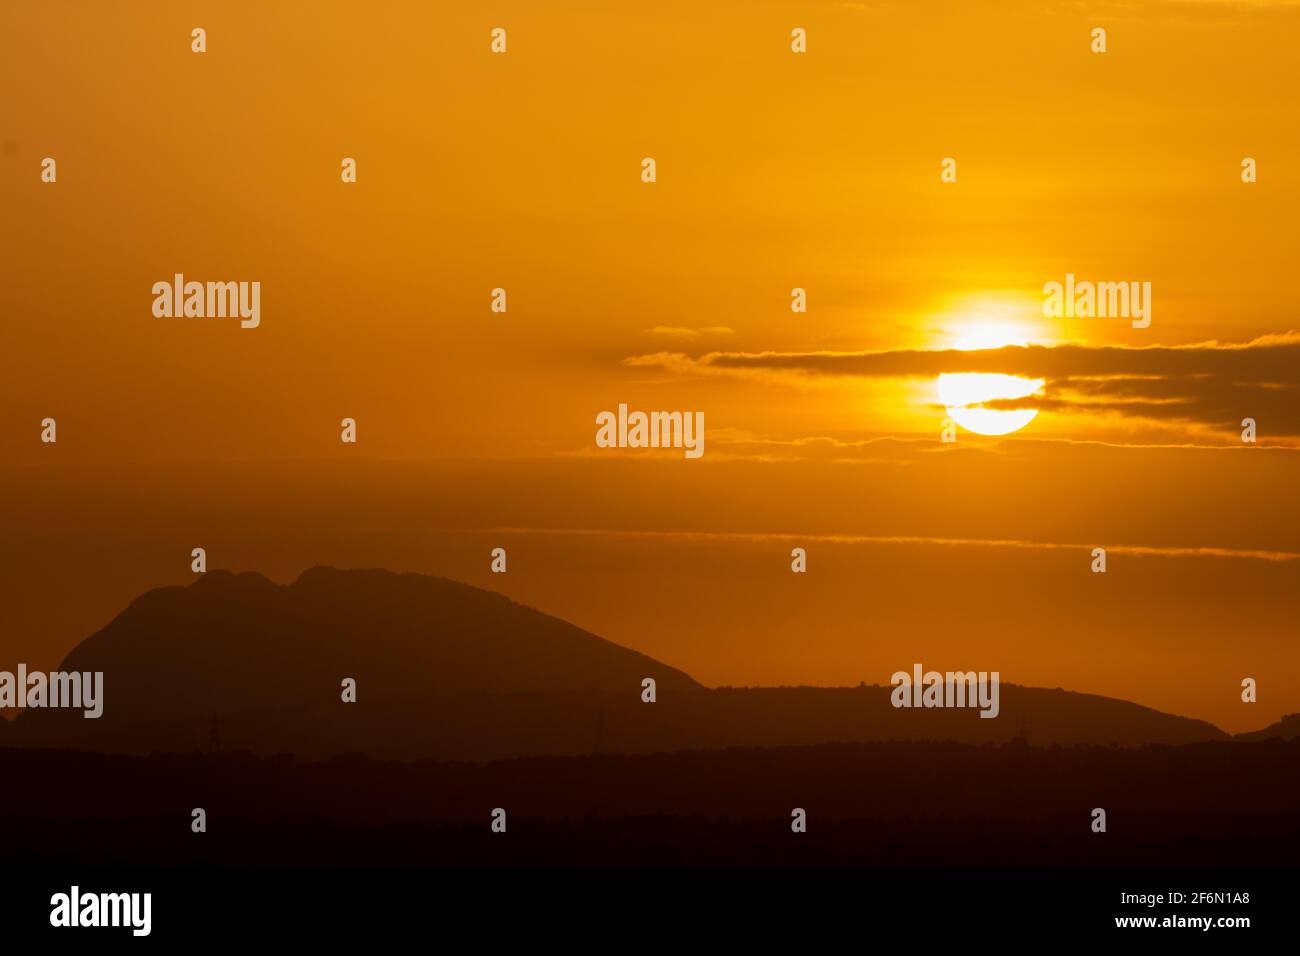 Silhouette of hills against beautiful golden hour sunset amidst a streak of clouds and beautiful orange sky Stock Photo